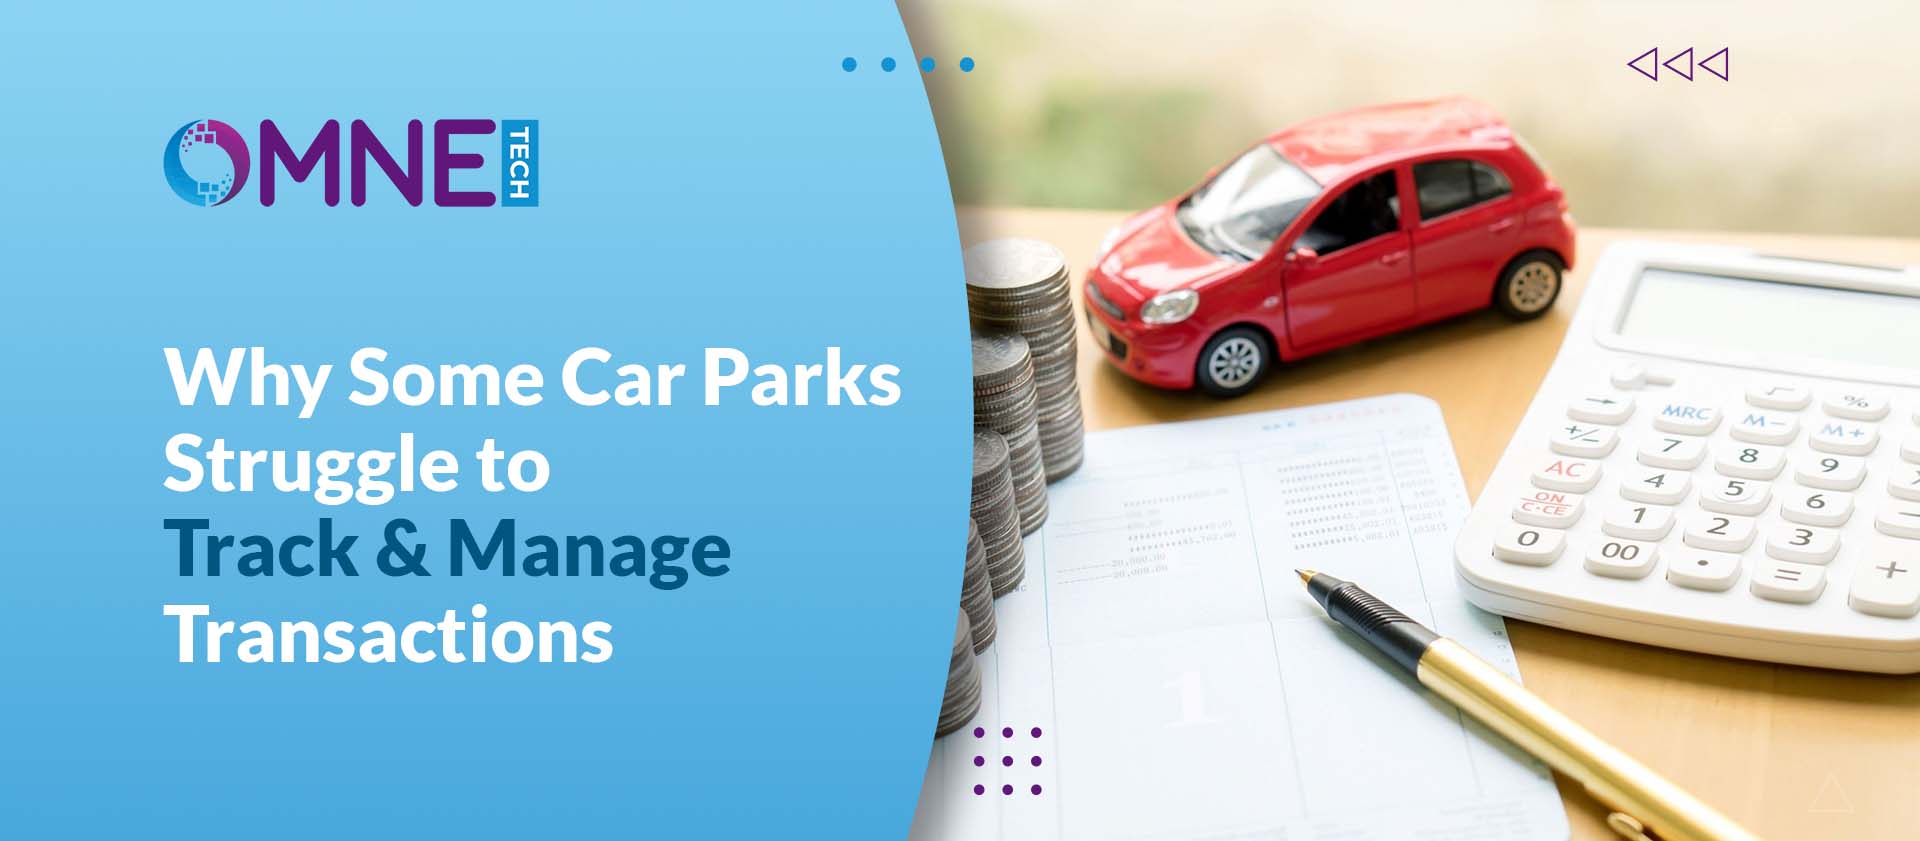 Why Some Car Parks Struggle to Track & Manage Transactions<br />
